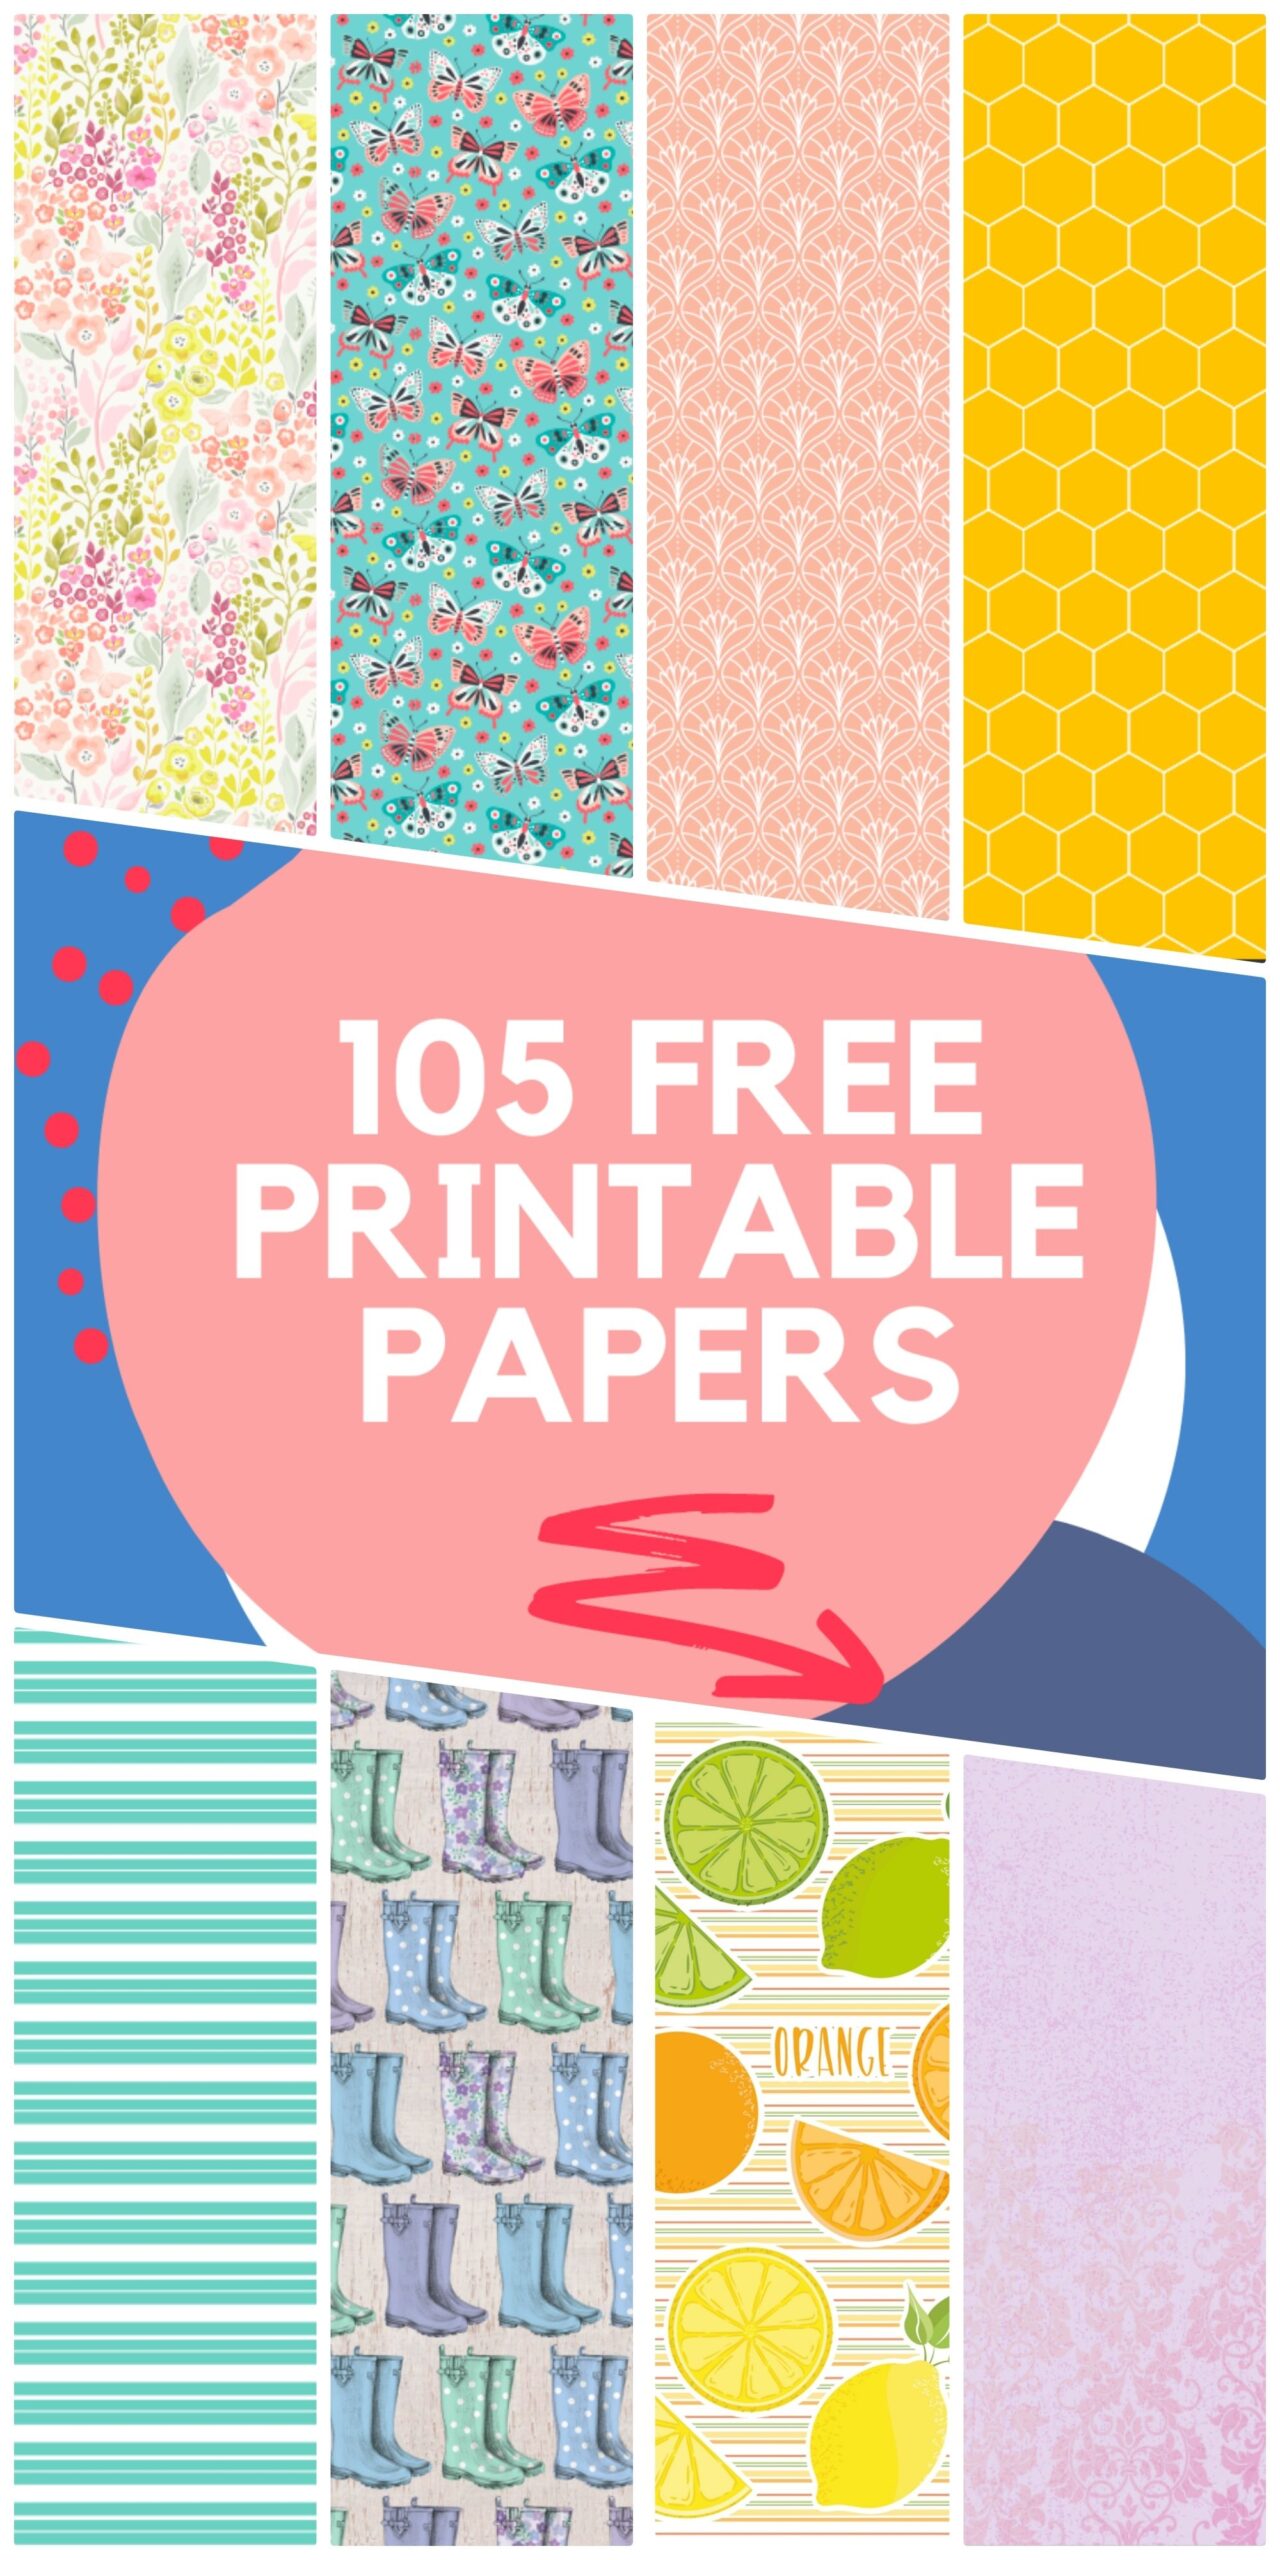 105 FREE Printable Papers - Free Printable Card Stock Paper